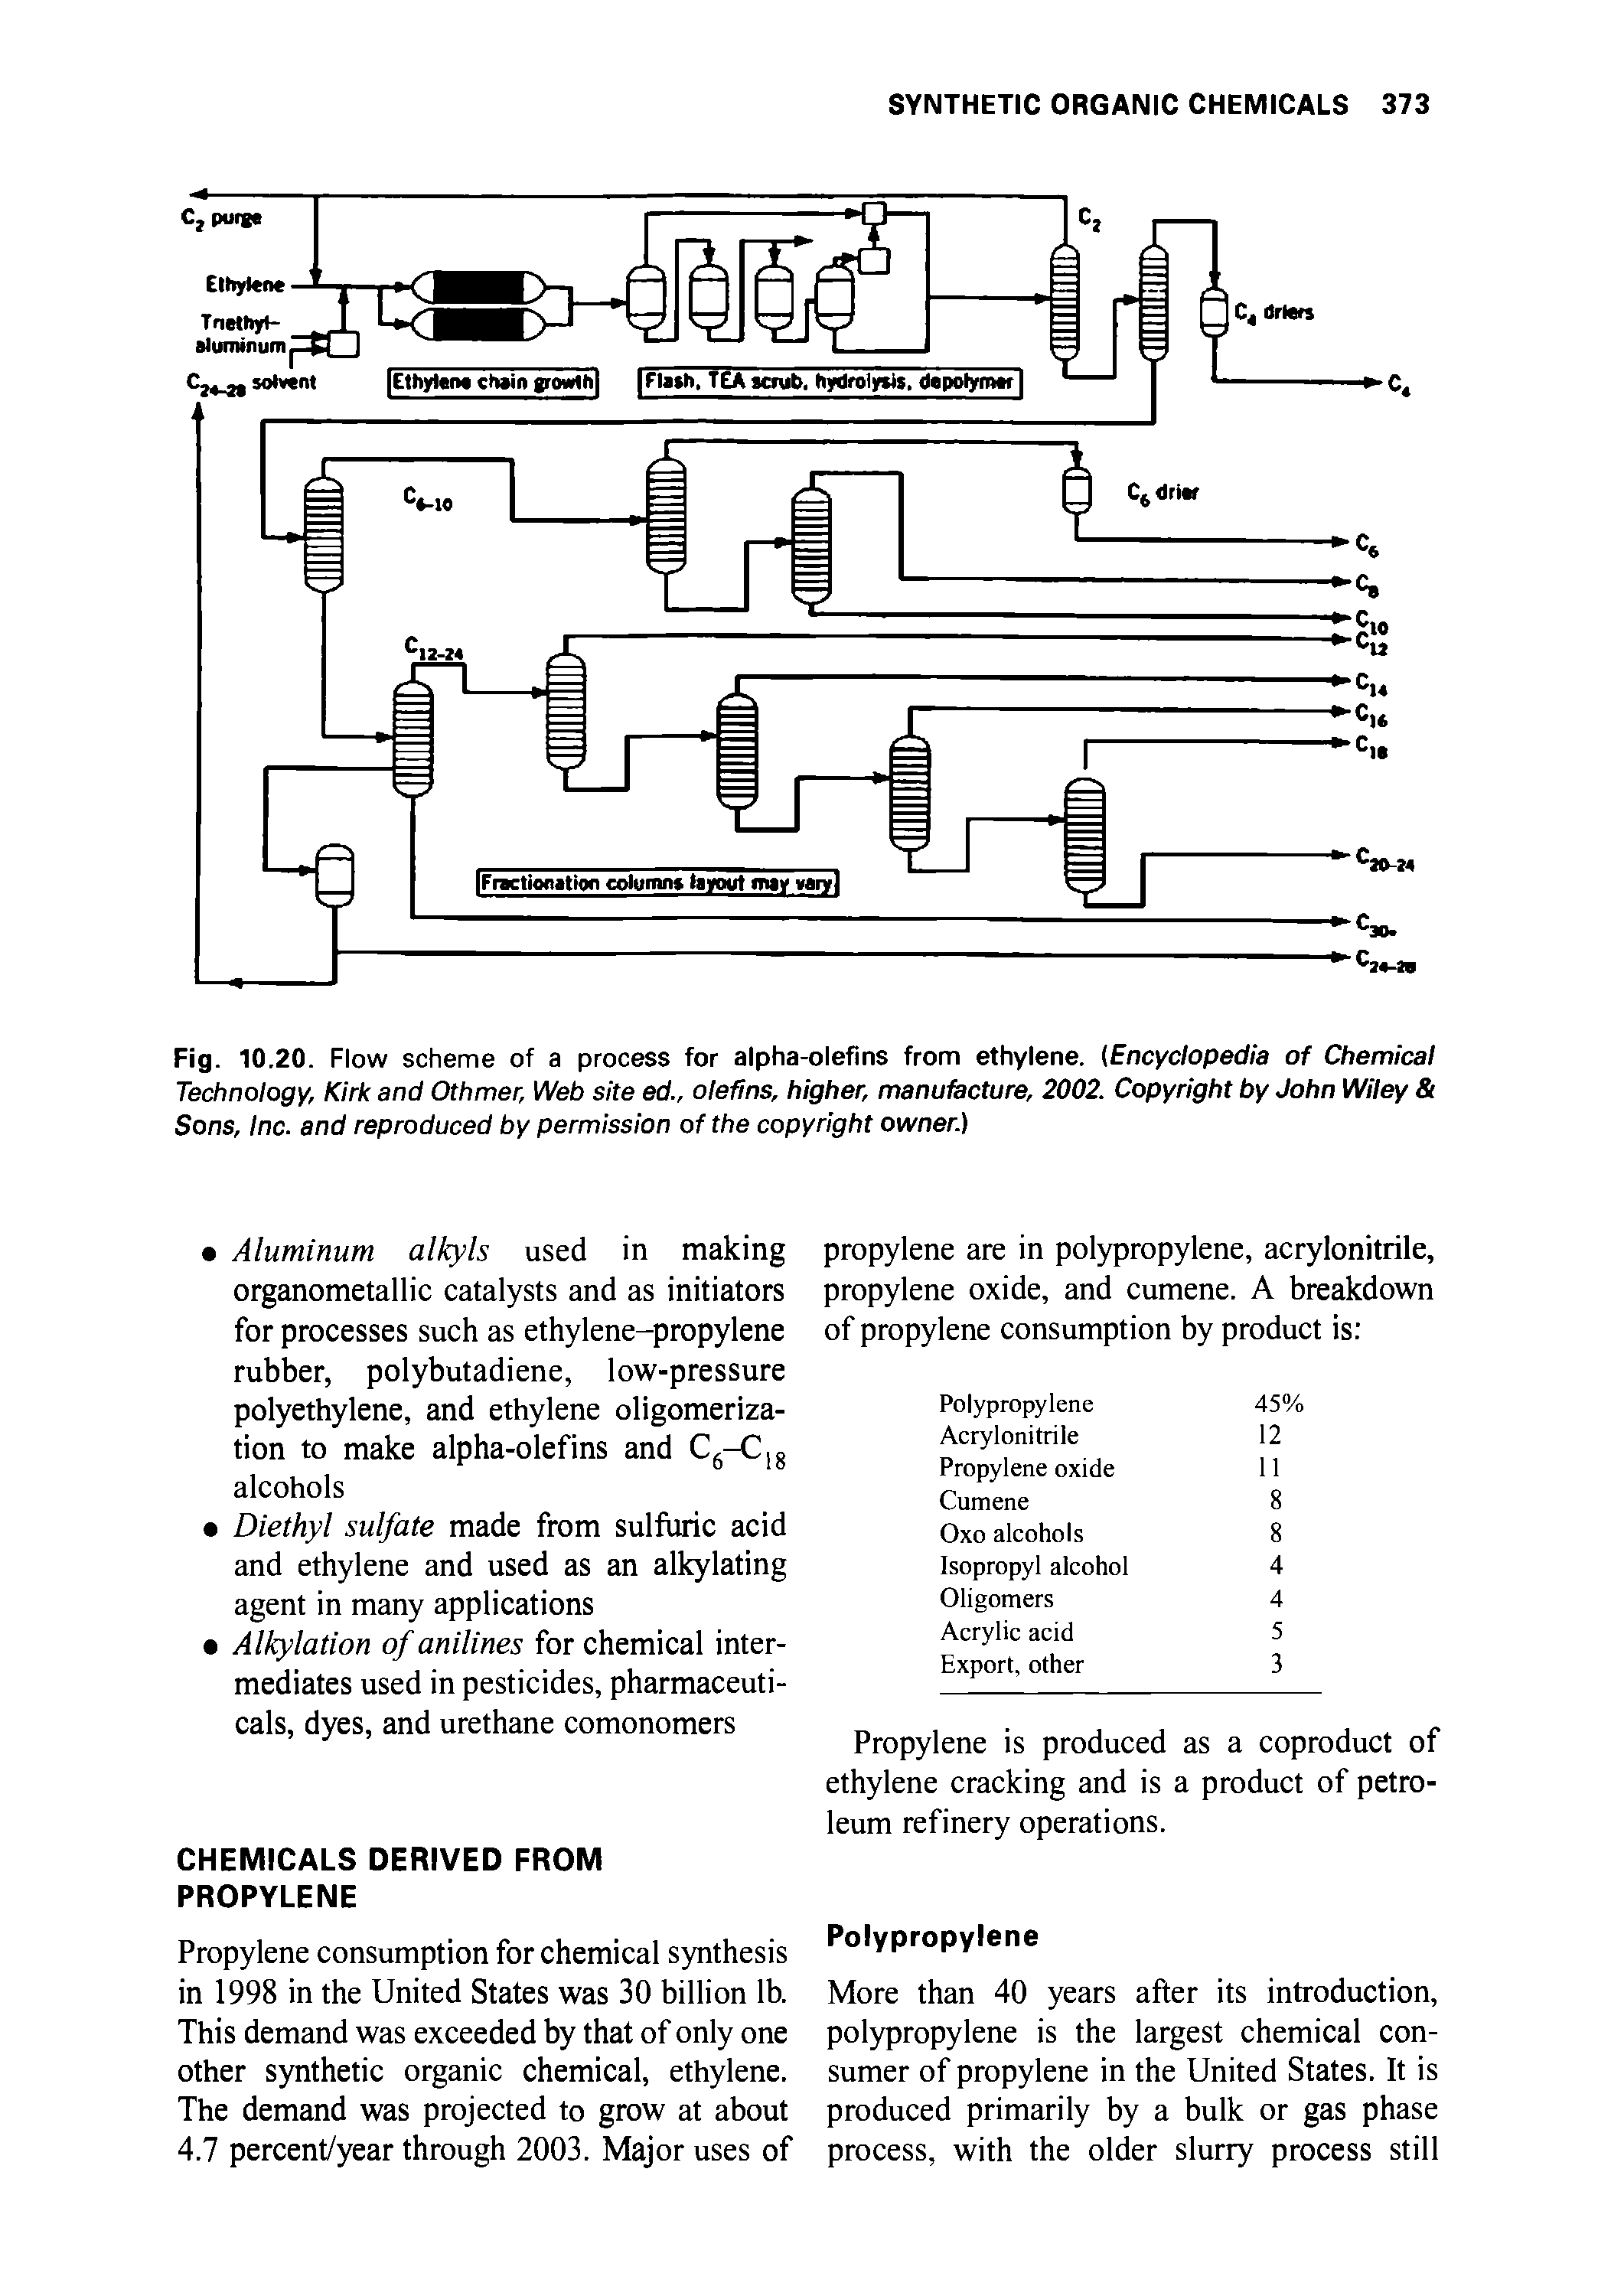 Fig. 10.20. Flow scheme of a process for alpha-olefins from ethylene. (Encyclopedia of Chemical Technology, Kirk and Othmer, Web site ed., olefins, higher, manufacture, 2002. Copyright by John Wiley Sons, Inc. and reproduced by permission of the copyright owner.)...